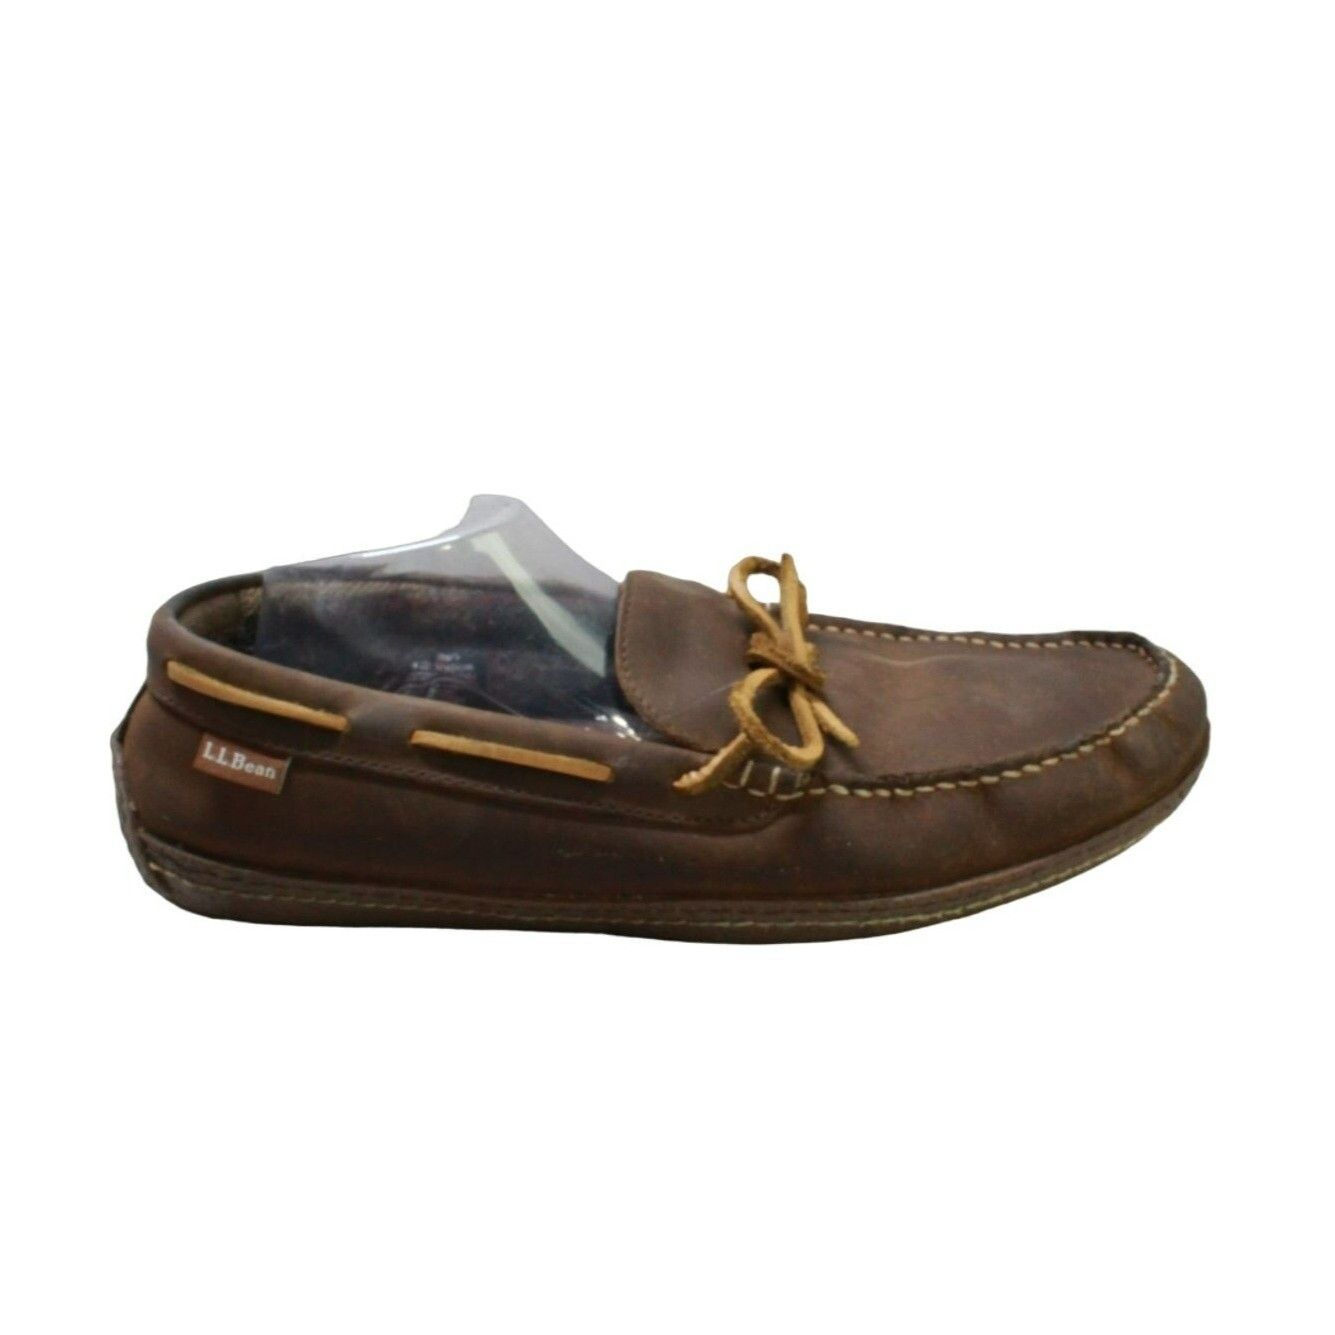 L.L. Bean LL Bean Men's Brown Leather Flannel-Lined Handsewn Slippers Size US 12 / EU 45 - 2 Preview